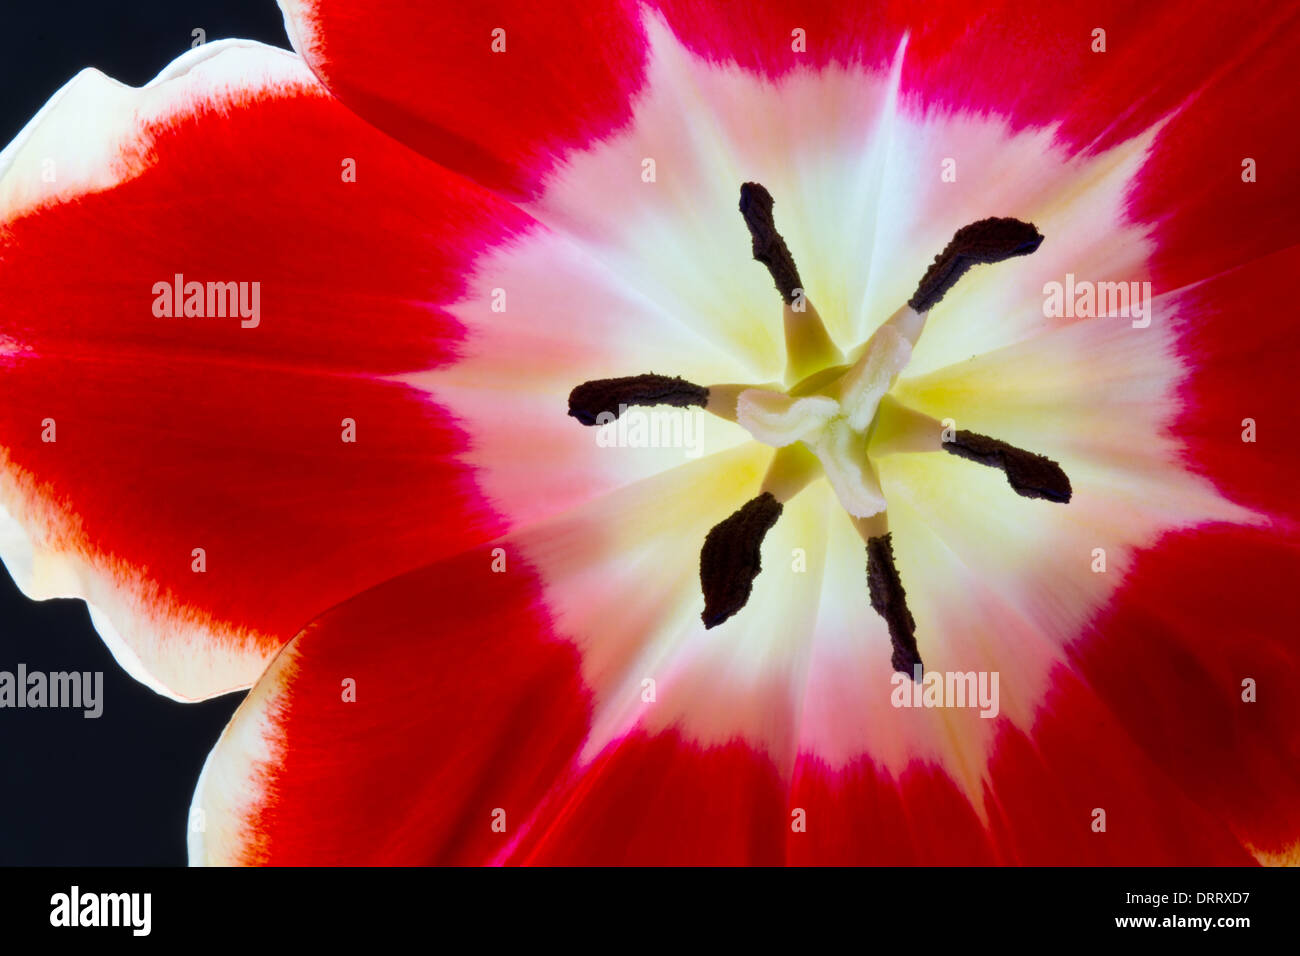 A close-up macro view of the inside of a red tulip (Tulipa suaveolens) flower set against a black background. Stock Photo